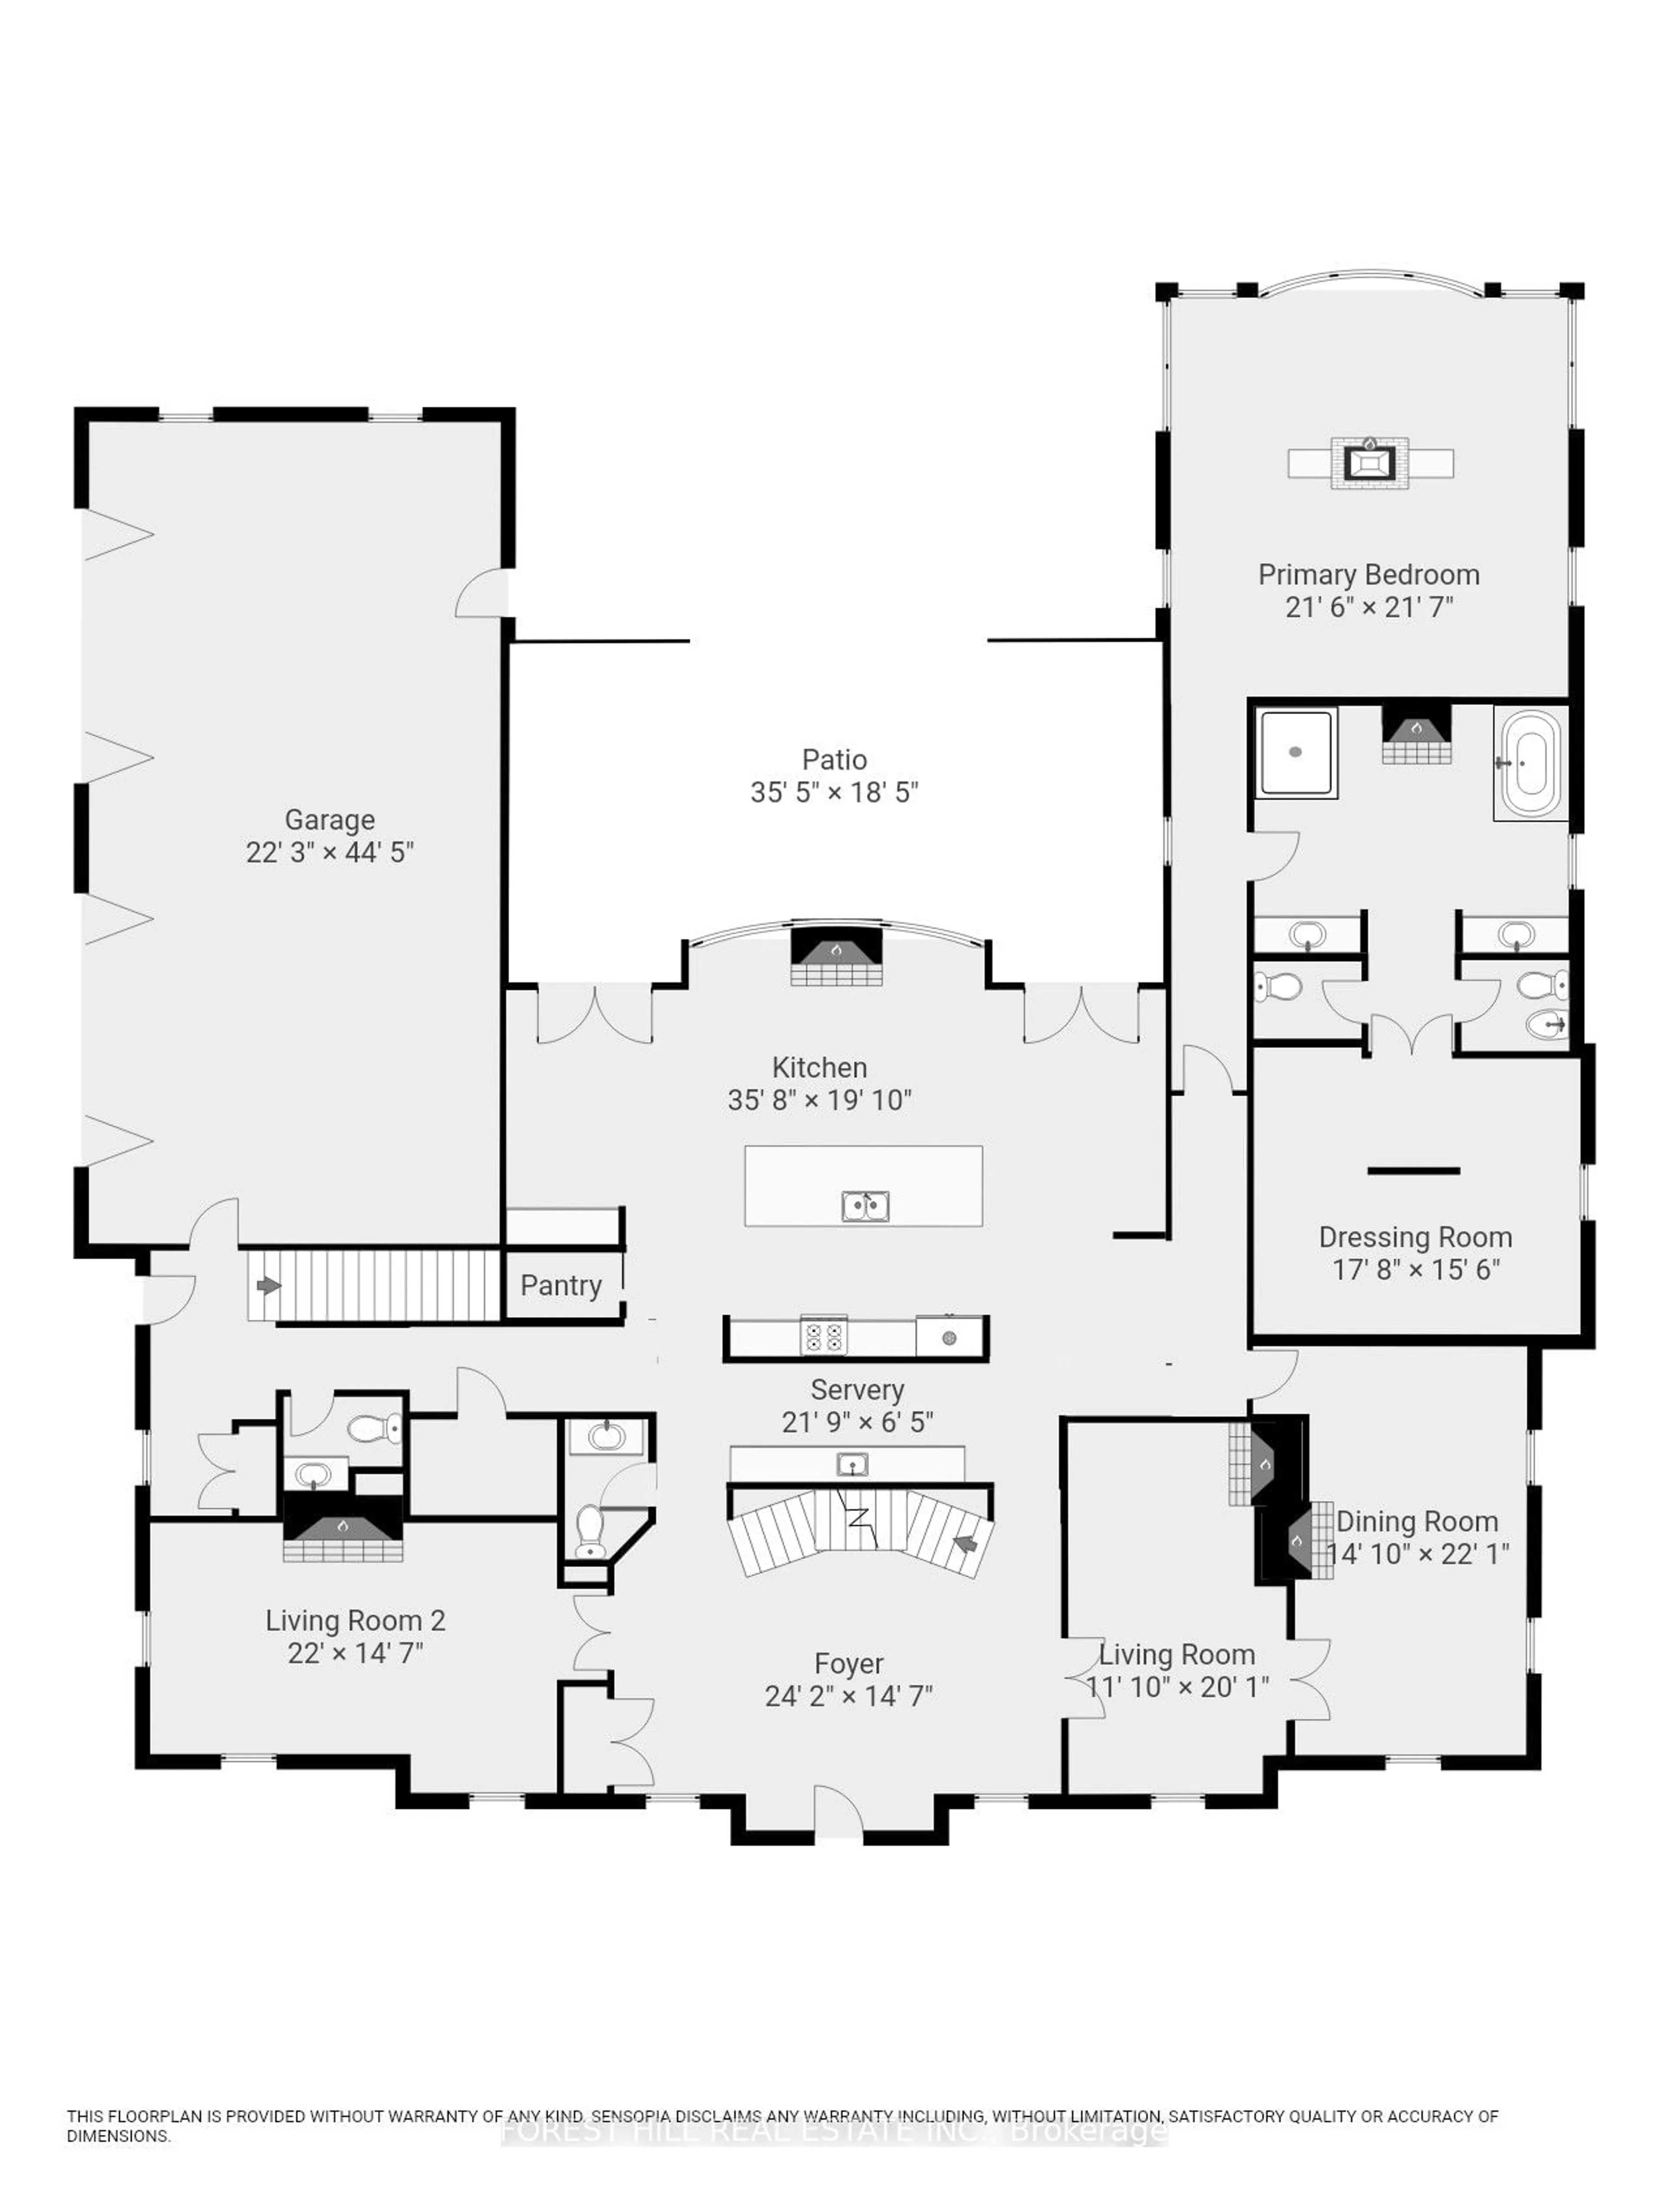 Floor plan for 2438 Doulton Dr, Mississauga Ontario L5H 3M3